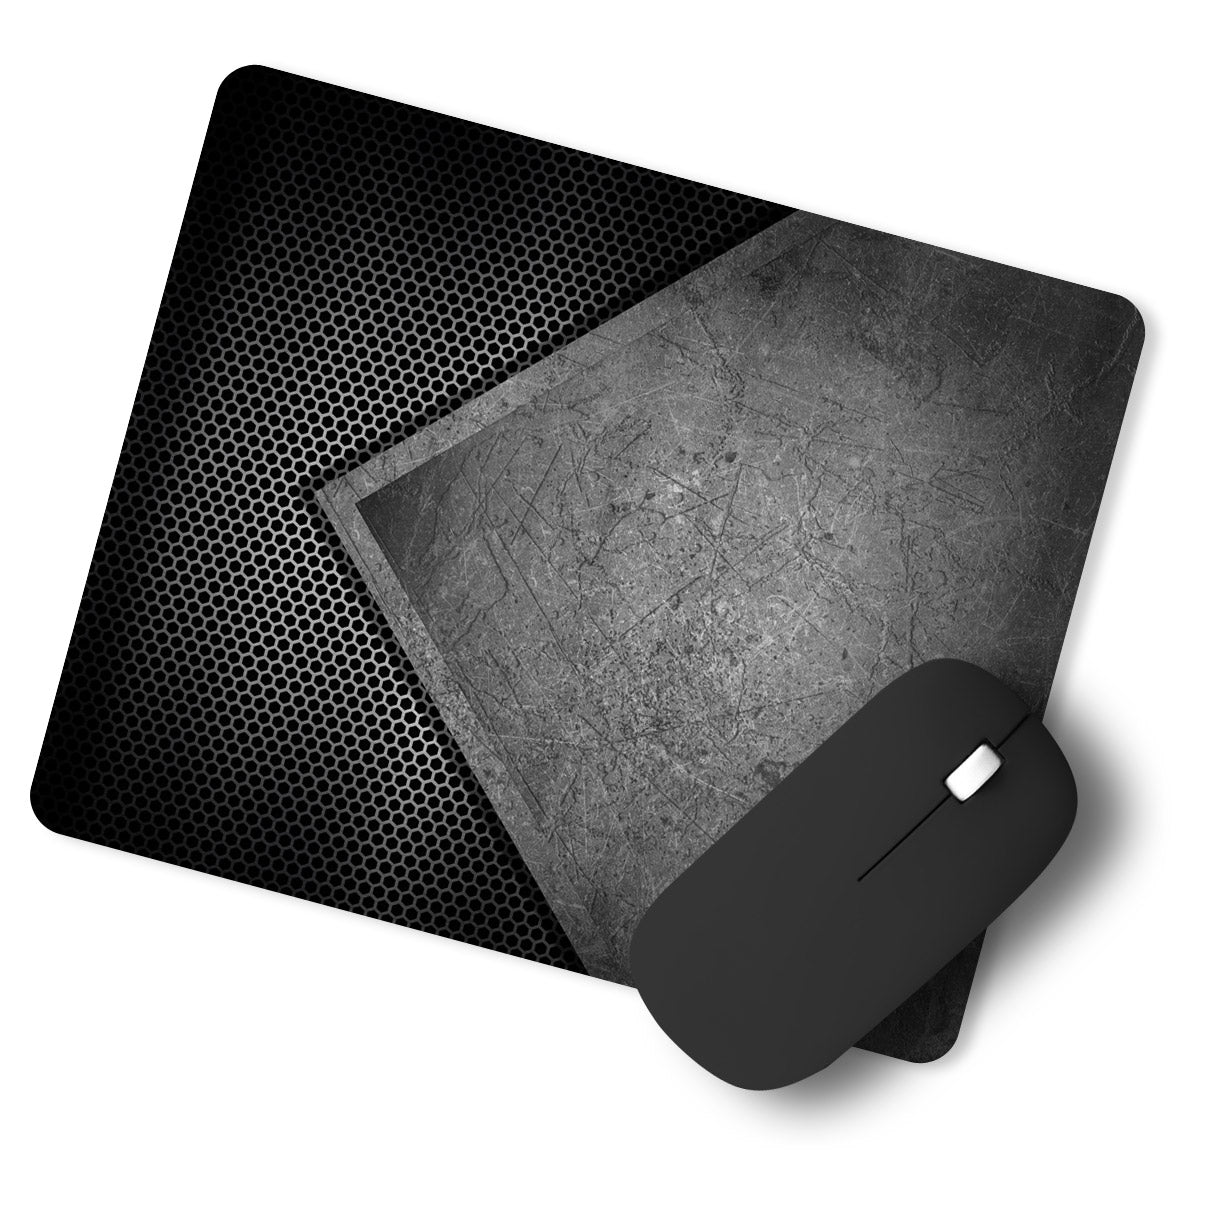 3d Grey Game Background Designer Printed Premium Mouse pad (9 in x 7.5 in)